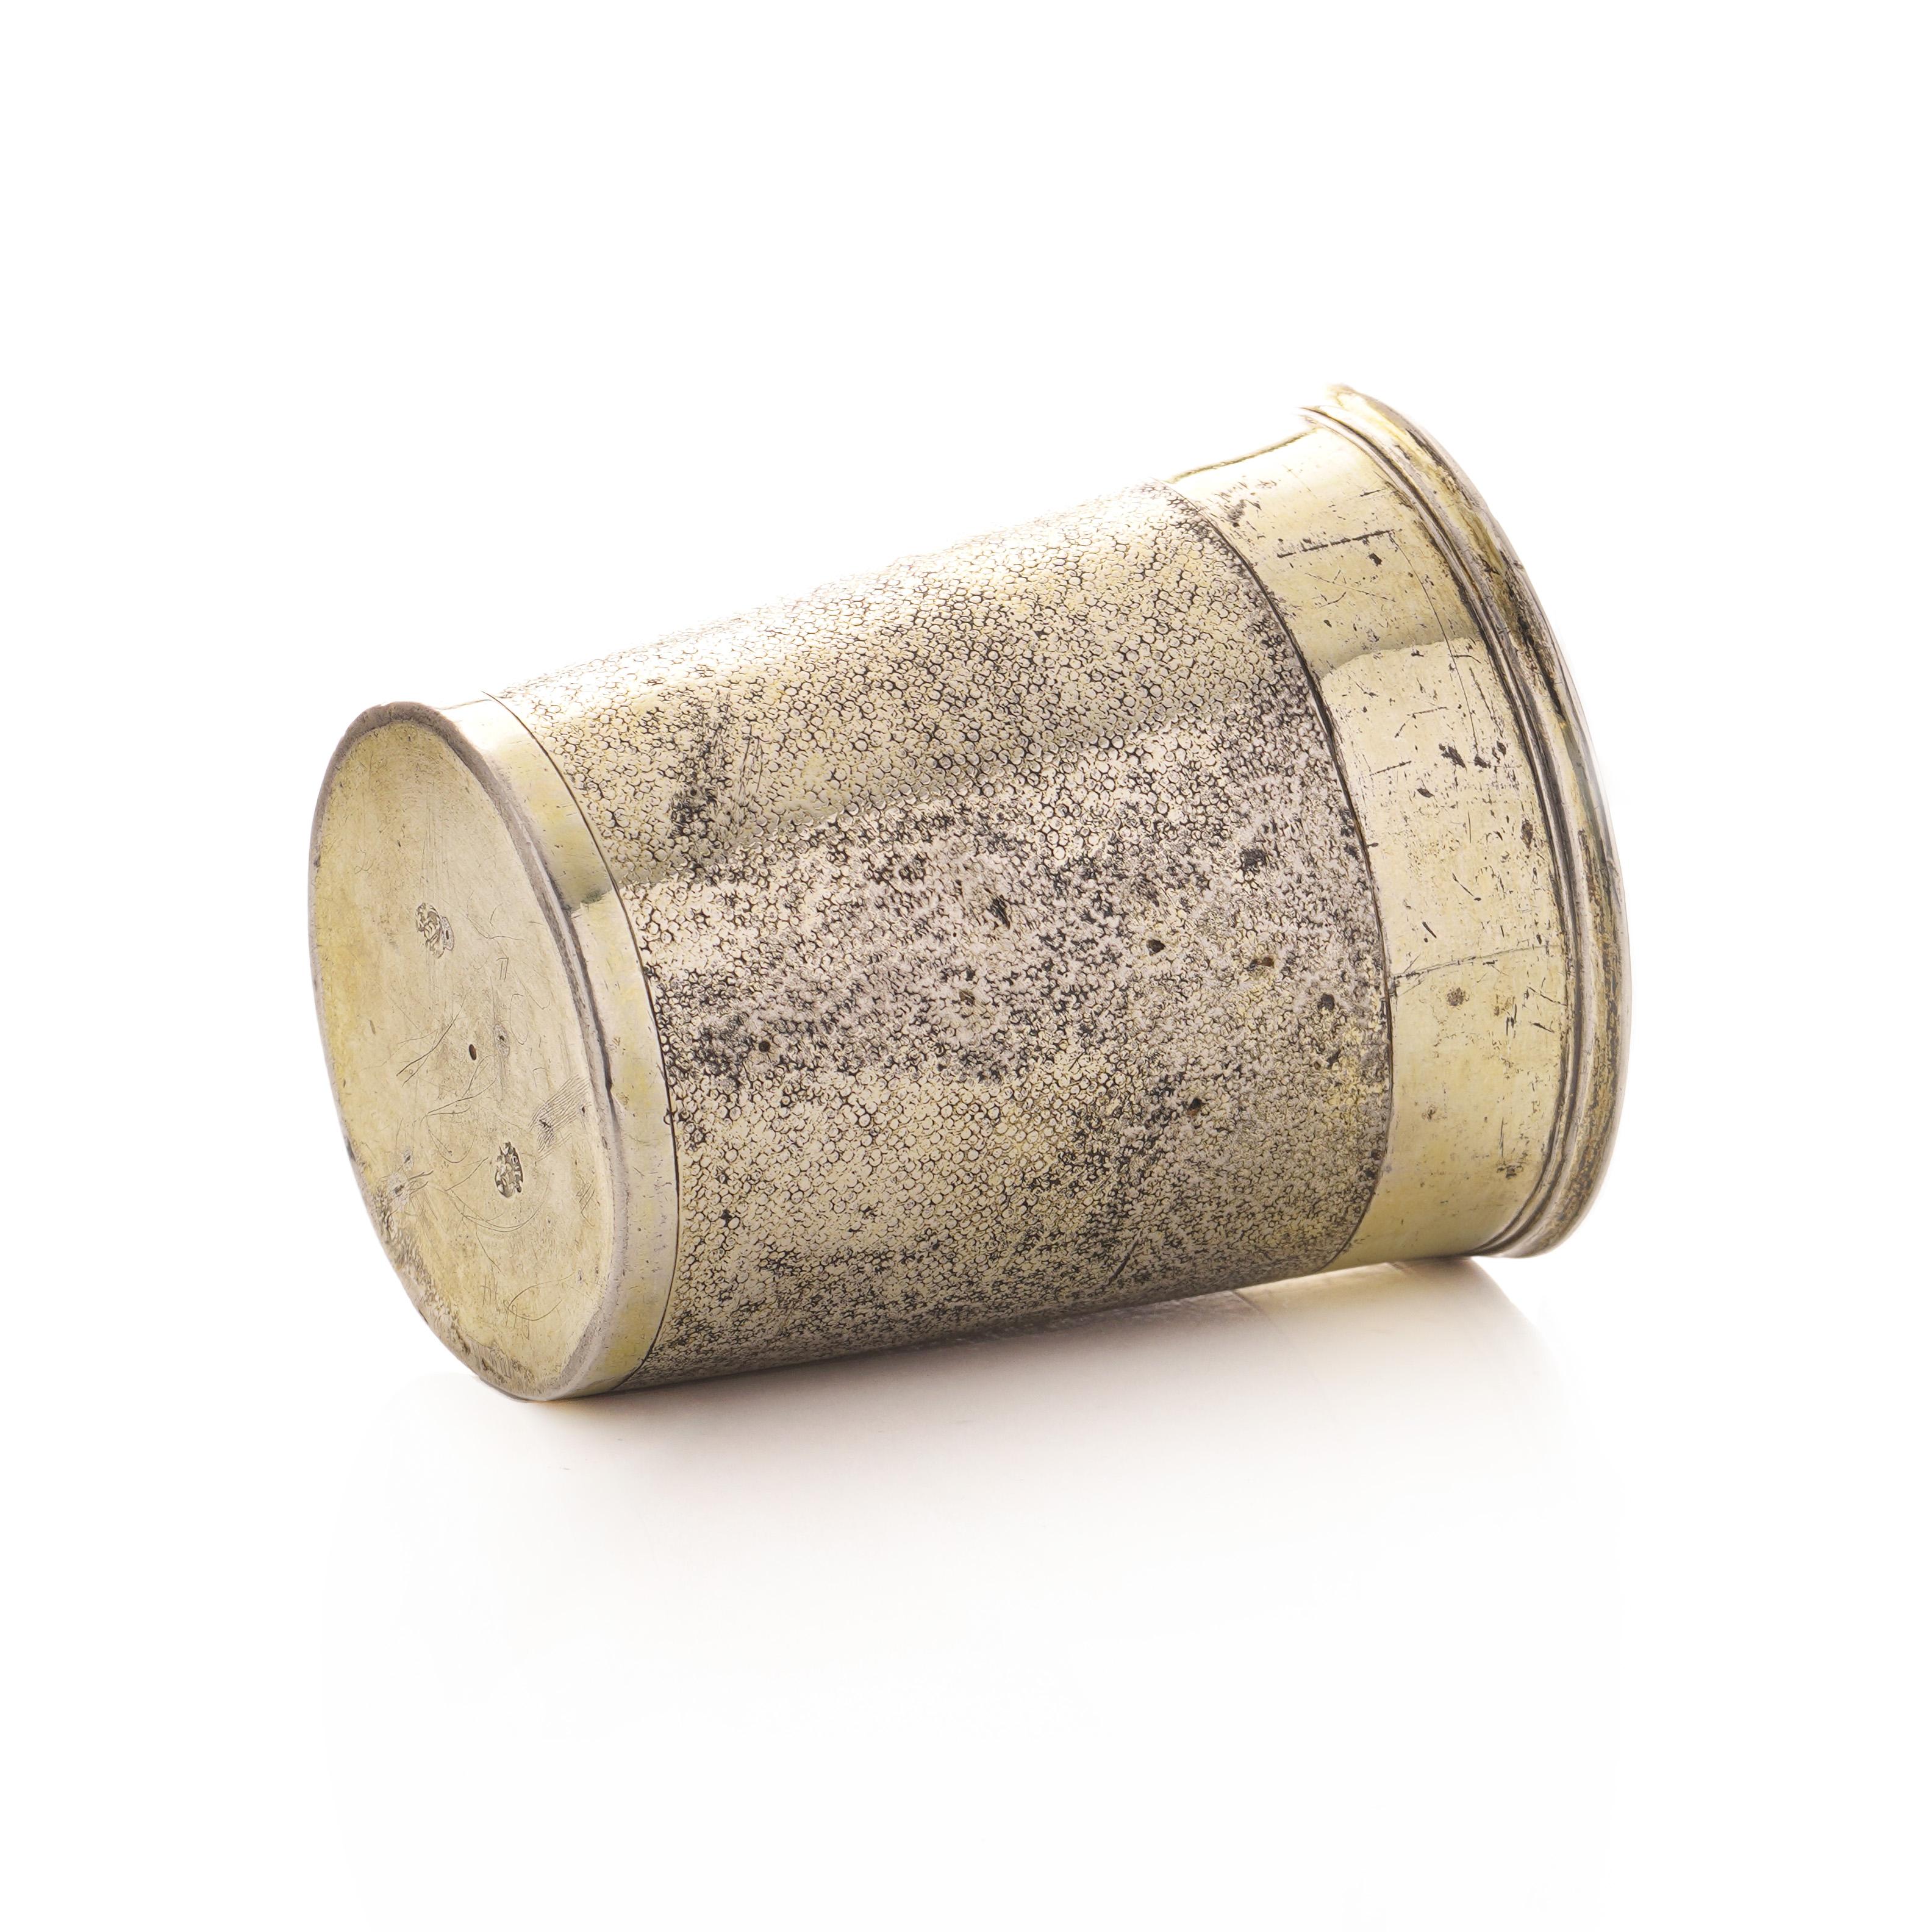 Antique Hanau 800. silver gilt beaker.
Tested positive for 800. silver. 

Made in Germany, Circa 1850- 1900s 

Dimensions:
Diameter x weight: 7.2 x 8.3 cm 
Weight: 114.3 grams

Condition: Age-related wear and tear, good condition overall.